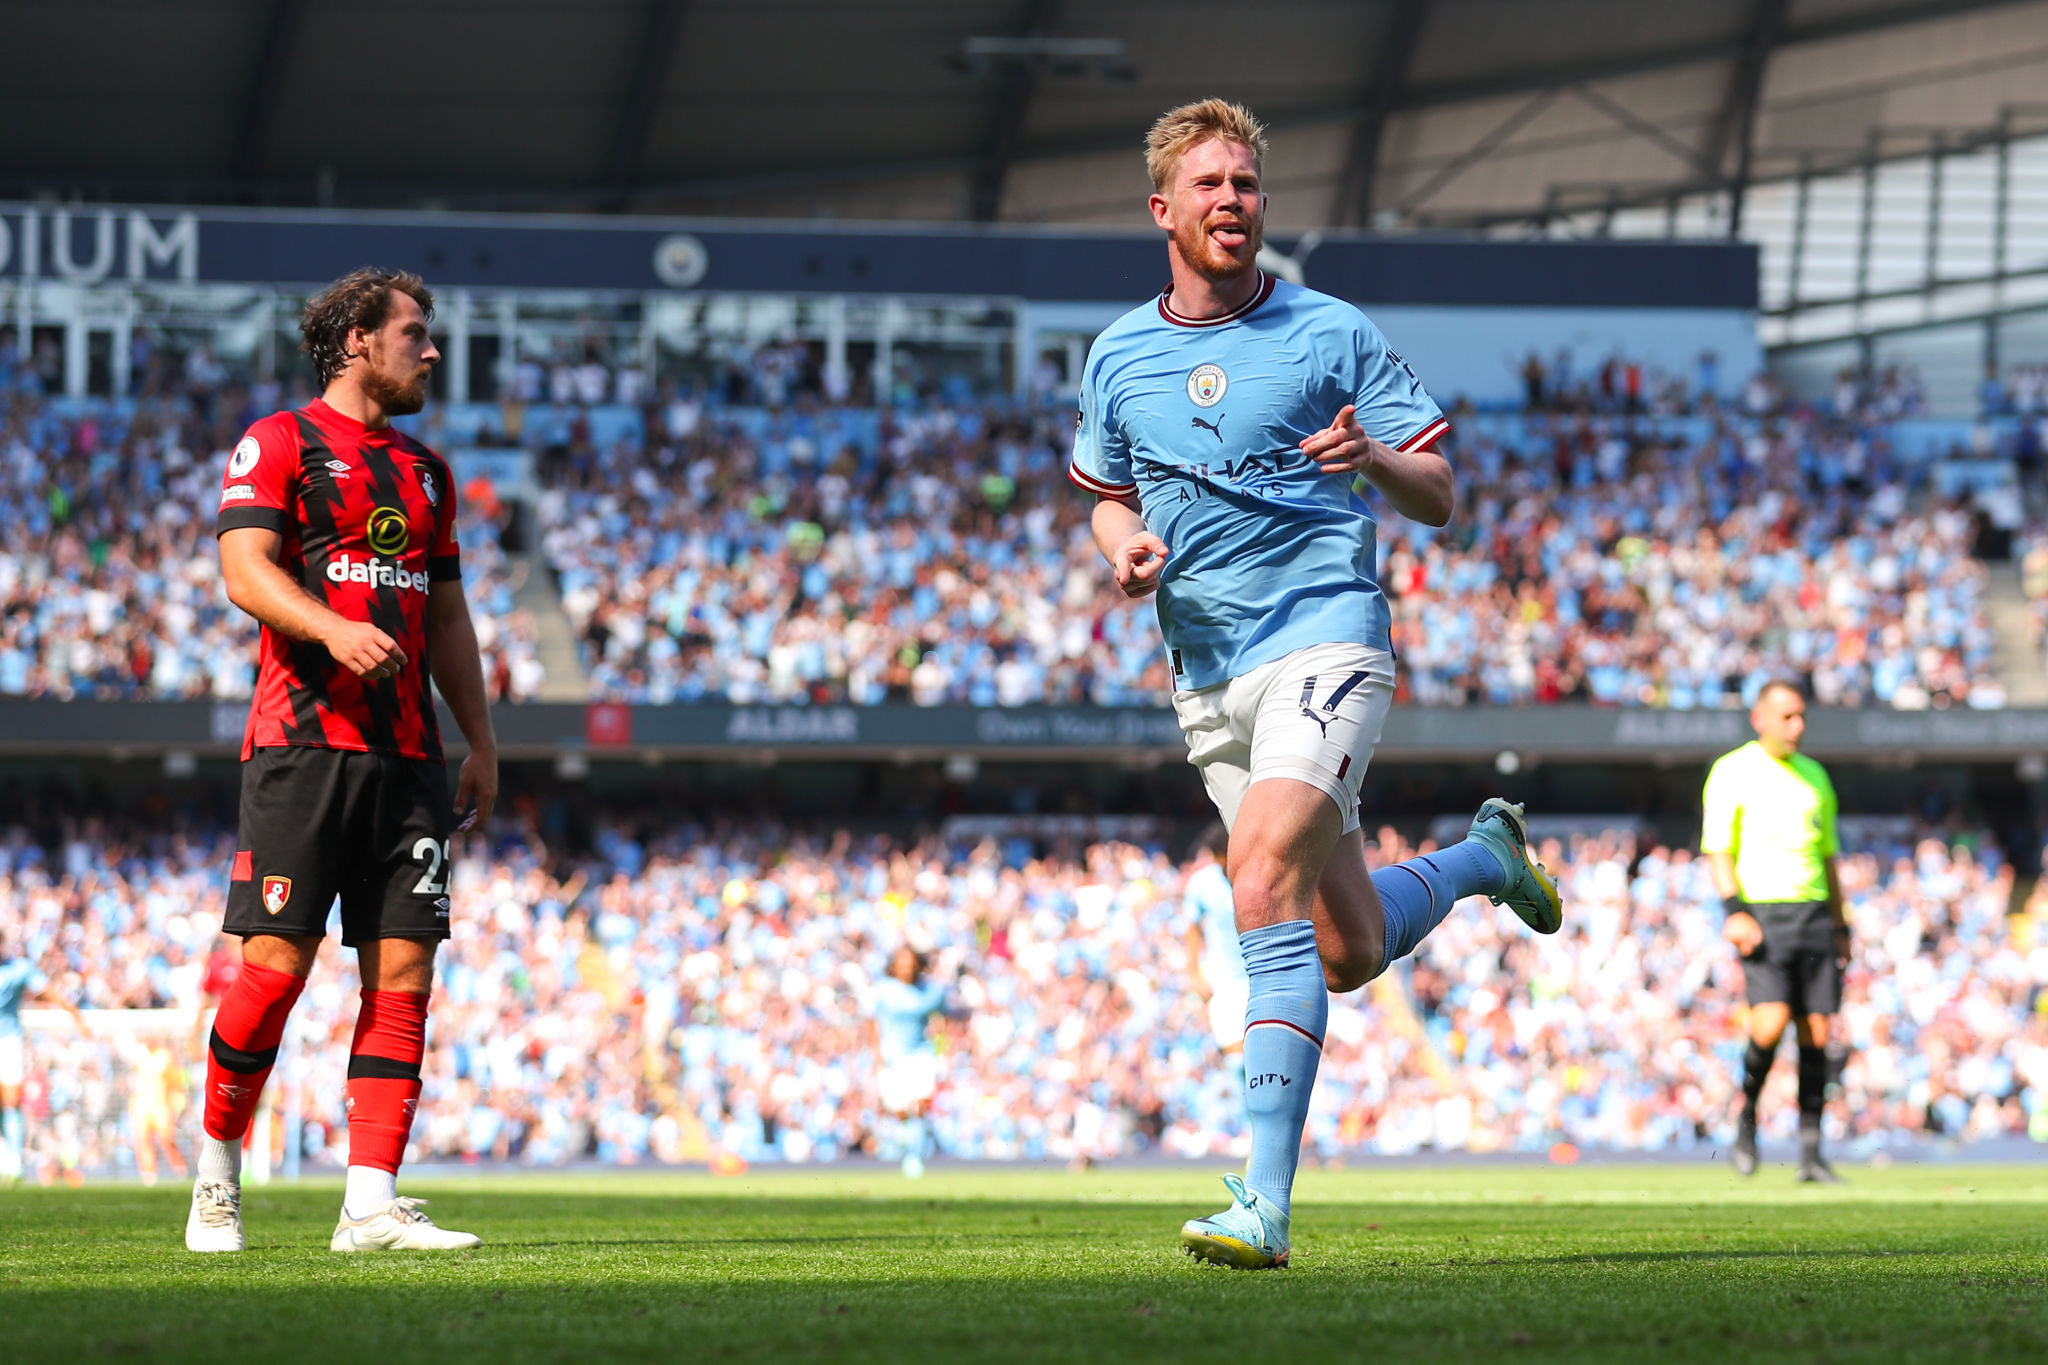 Man City vs Bournemouth LIVE: MCI 4-0 BOU, Kevin De Bruyne, Foden run riot against the Cherries in a 4-0 victory at the Etihad Stadium, Check Manchester City beat Bournemouth HIGHLIGHTS